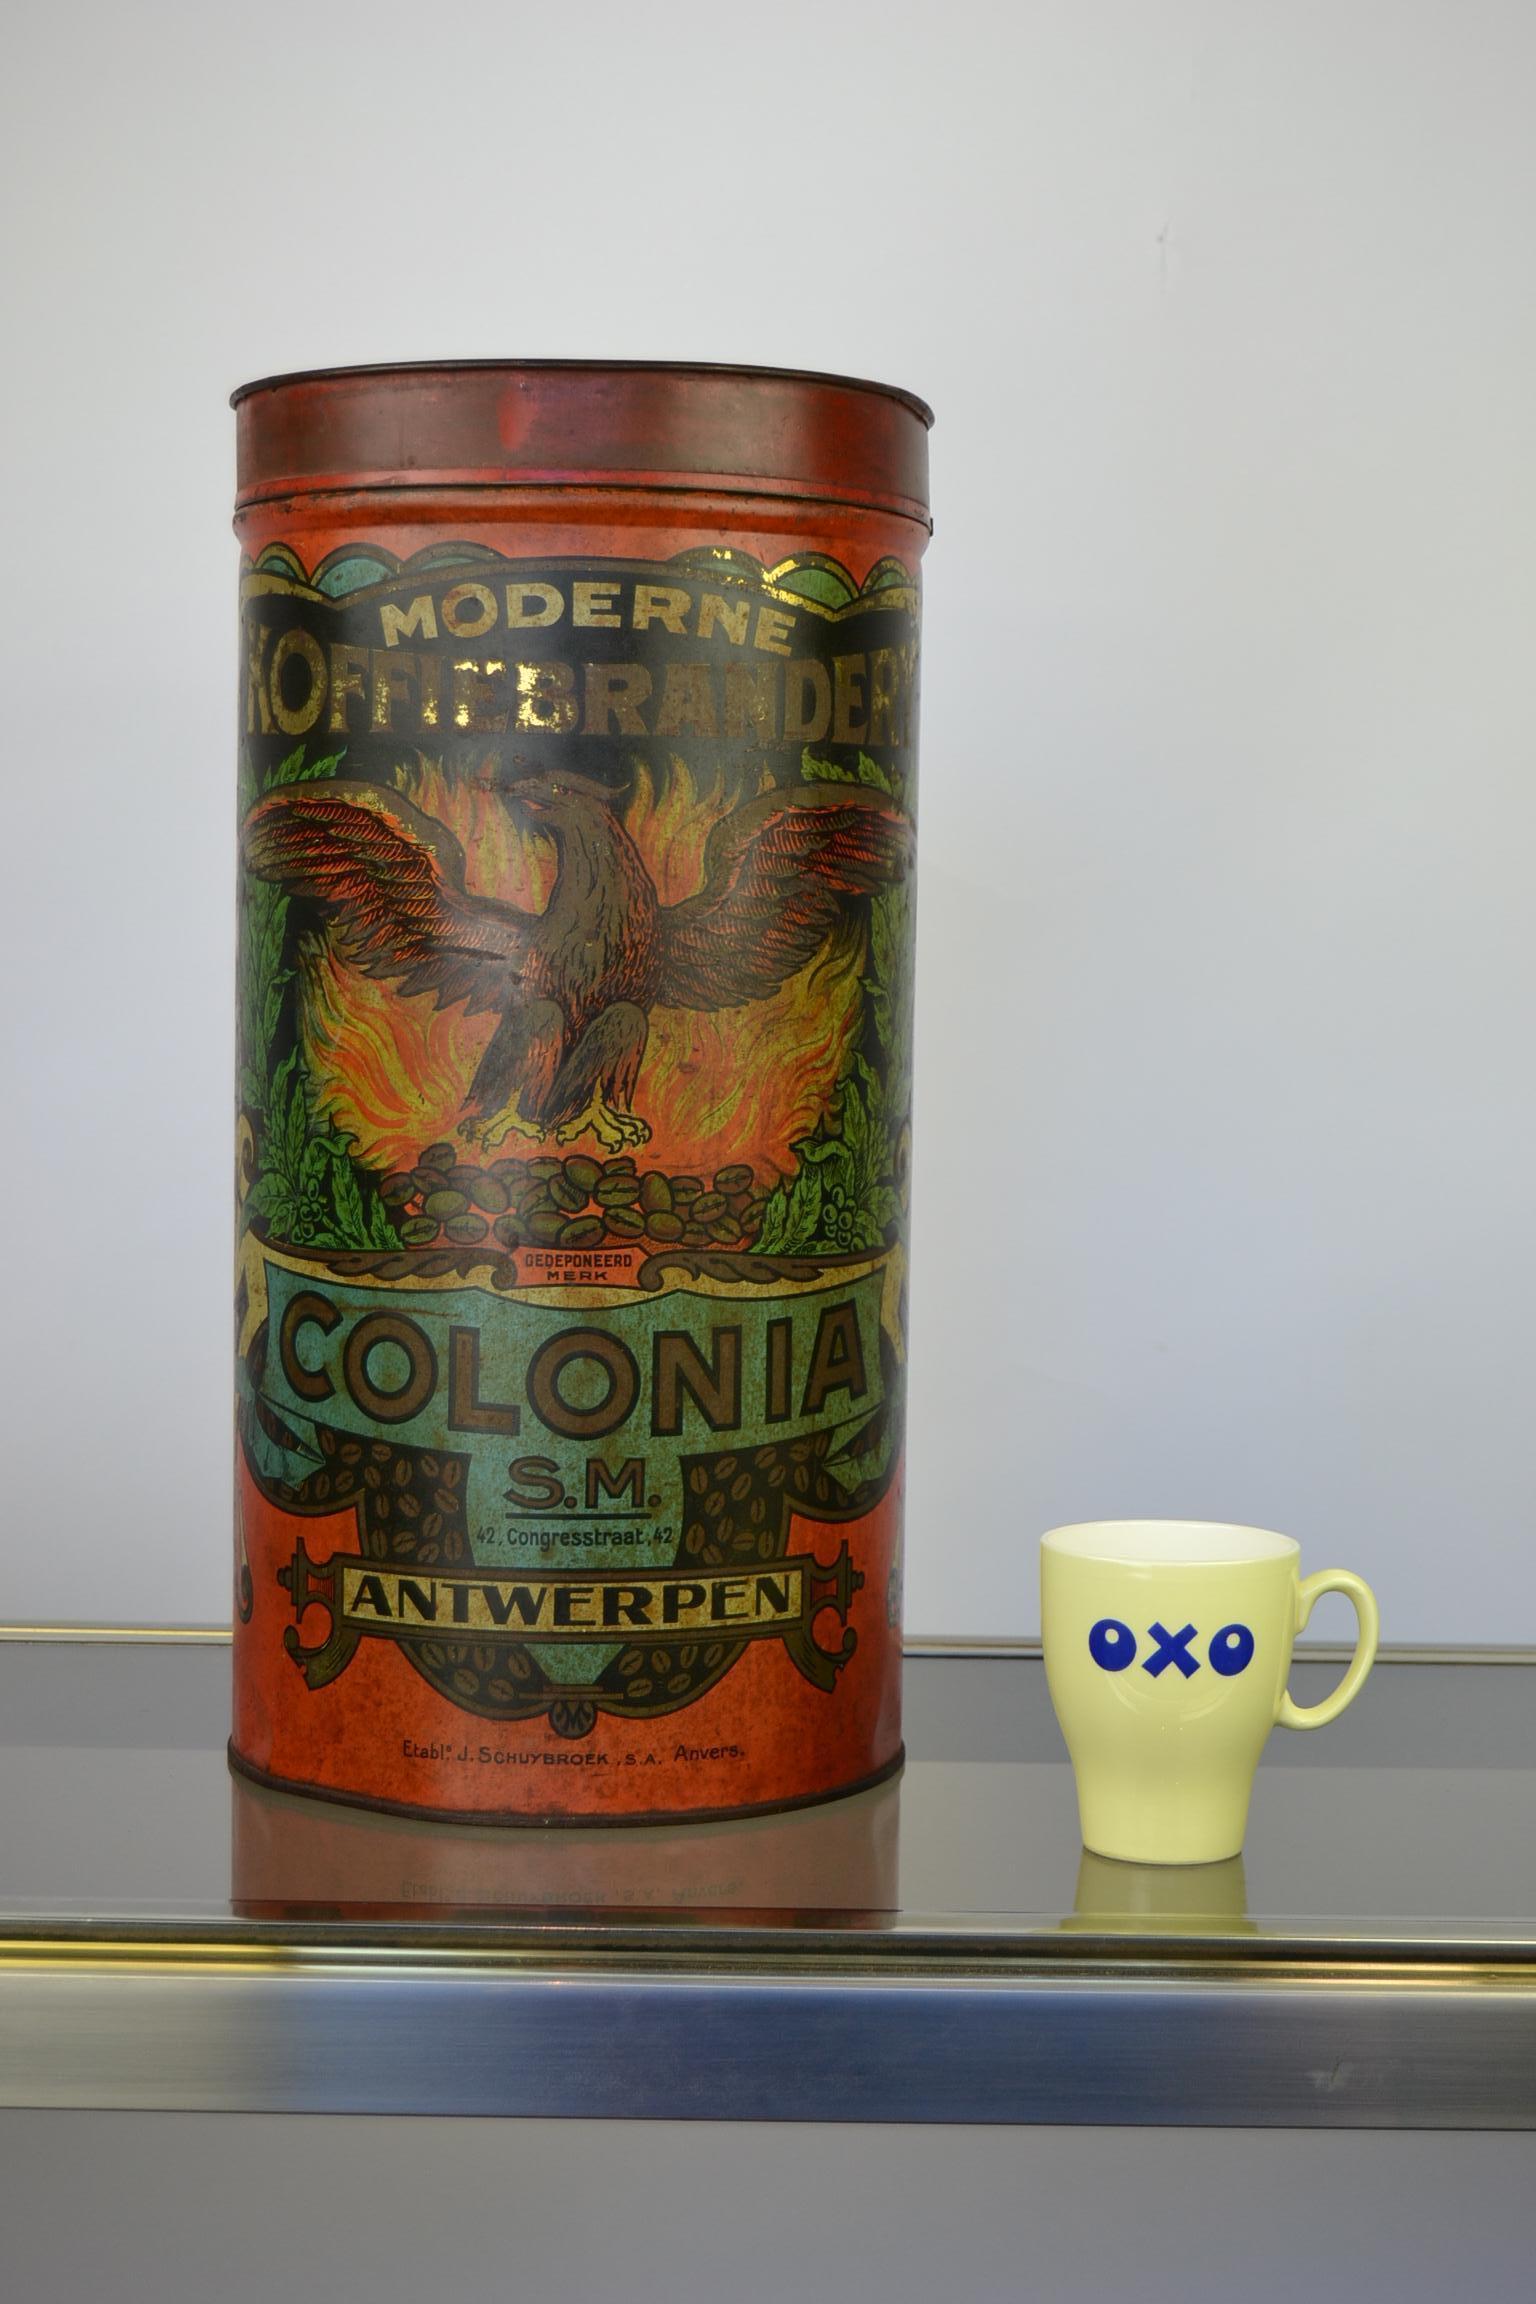 Awesome large coffee tin - coffee tin box from the early 20th century.
This tube shaped red coffee container has a great lithographic design:
An eagle with its wings spread on top of burning coffee beans.
This antique coffee tin was made by